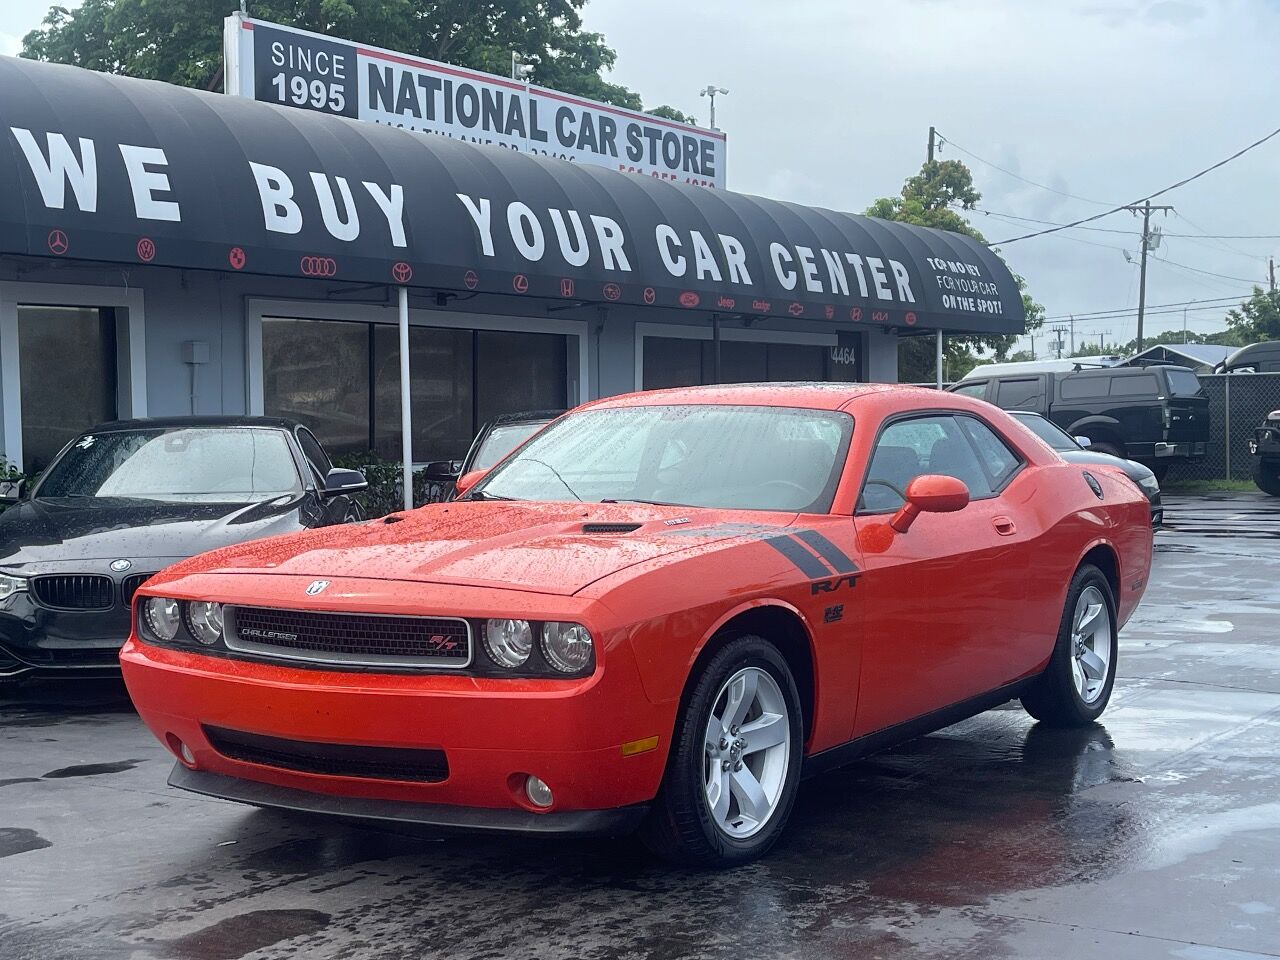 2010 DODGE Challenger Coupe - $16,900